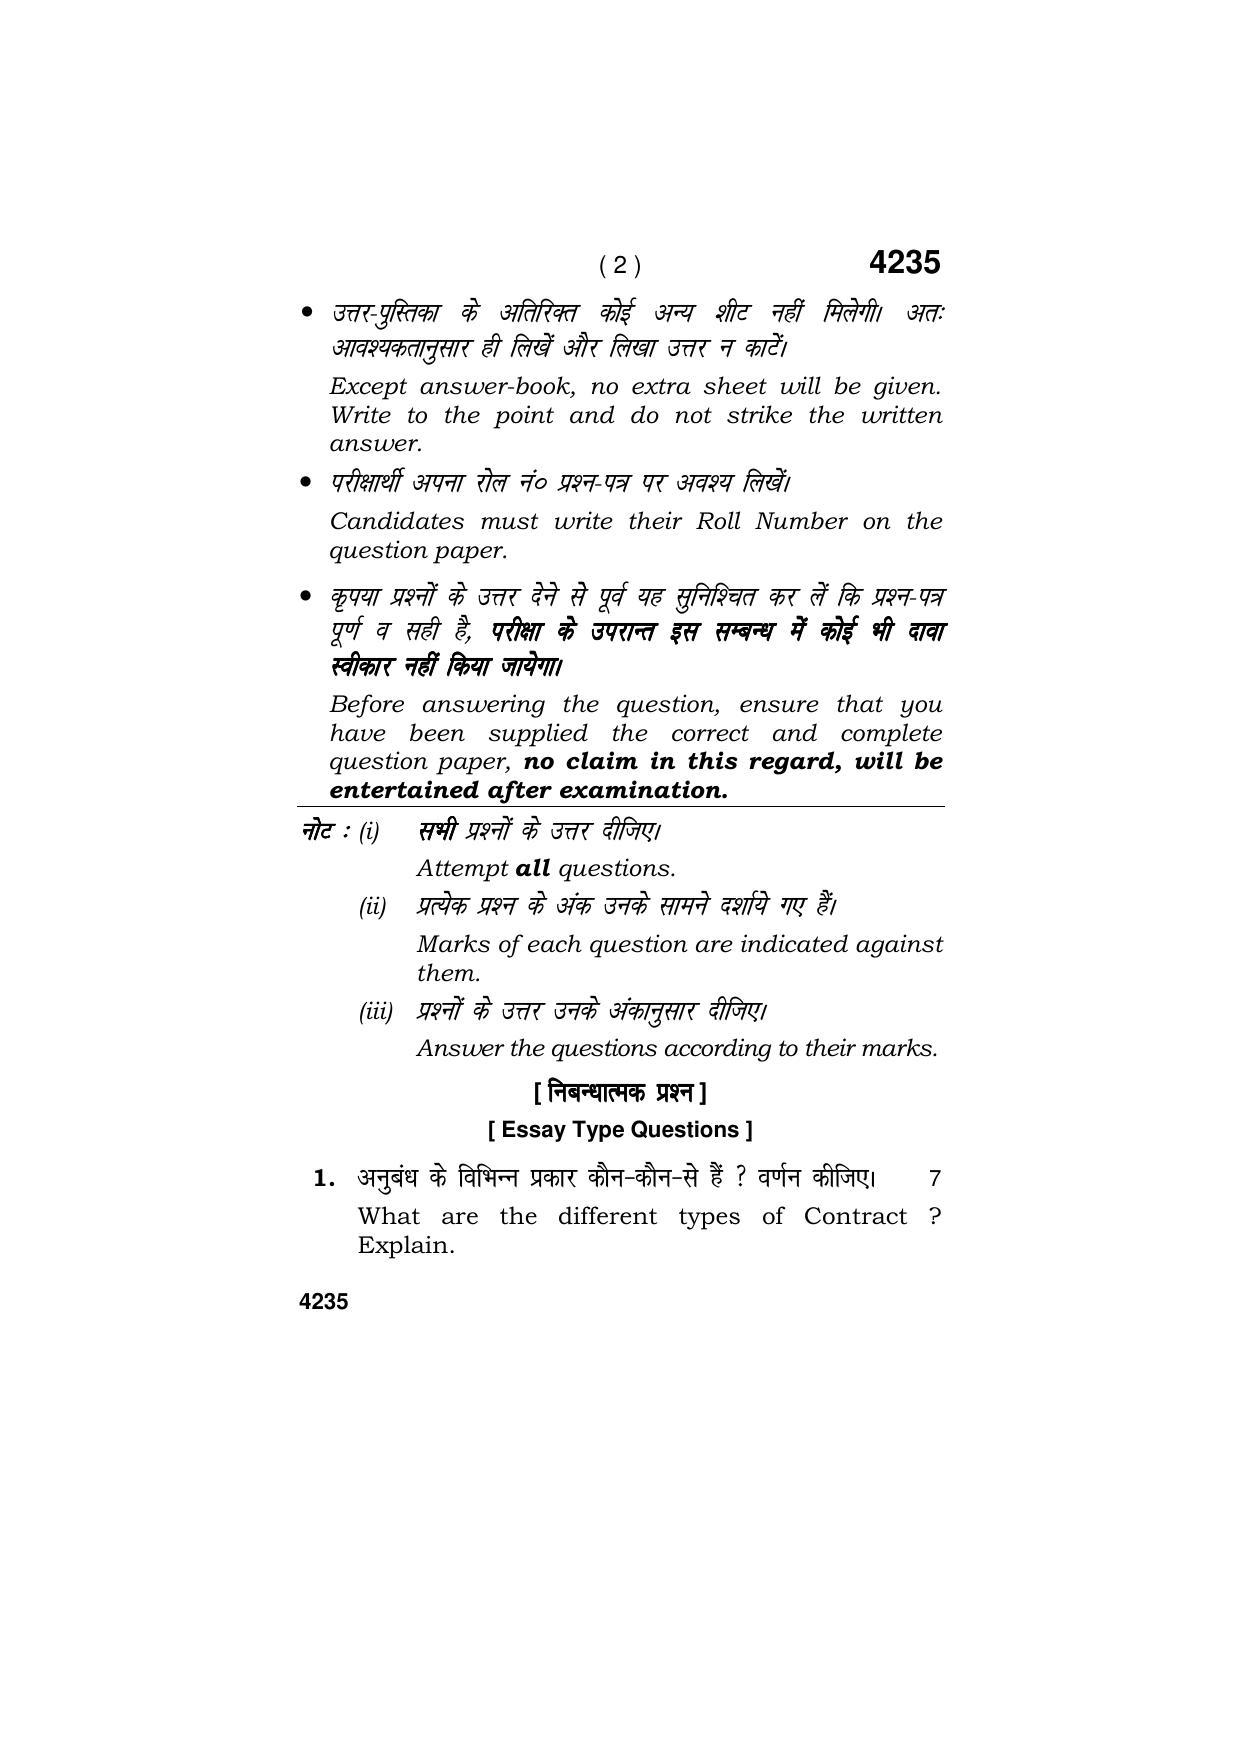 Haryana Board HBSE Class 10 Banking & Insurance Services 2019 Question Paper - Page 2